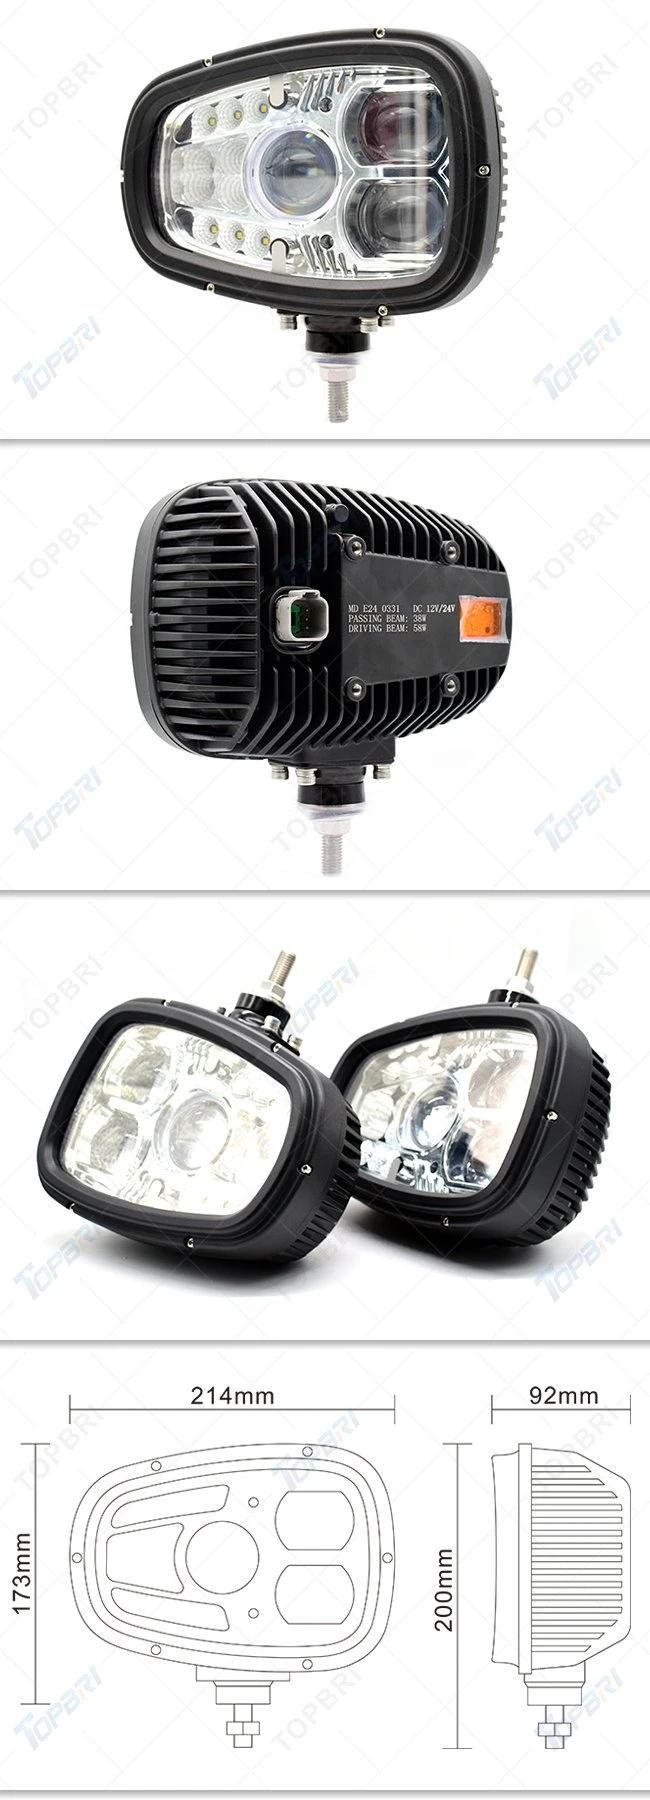 96W Auto Working Lamps LED Driving Work Lights for Car Truck